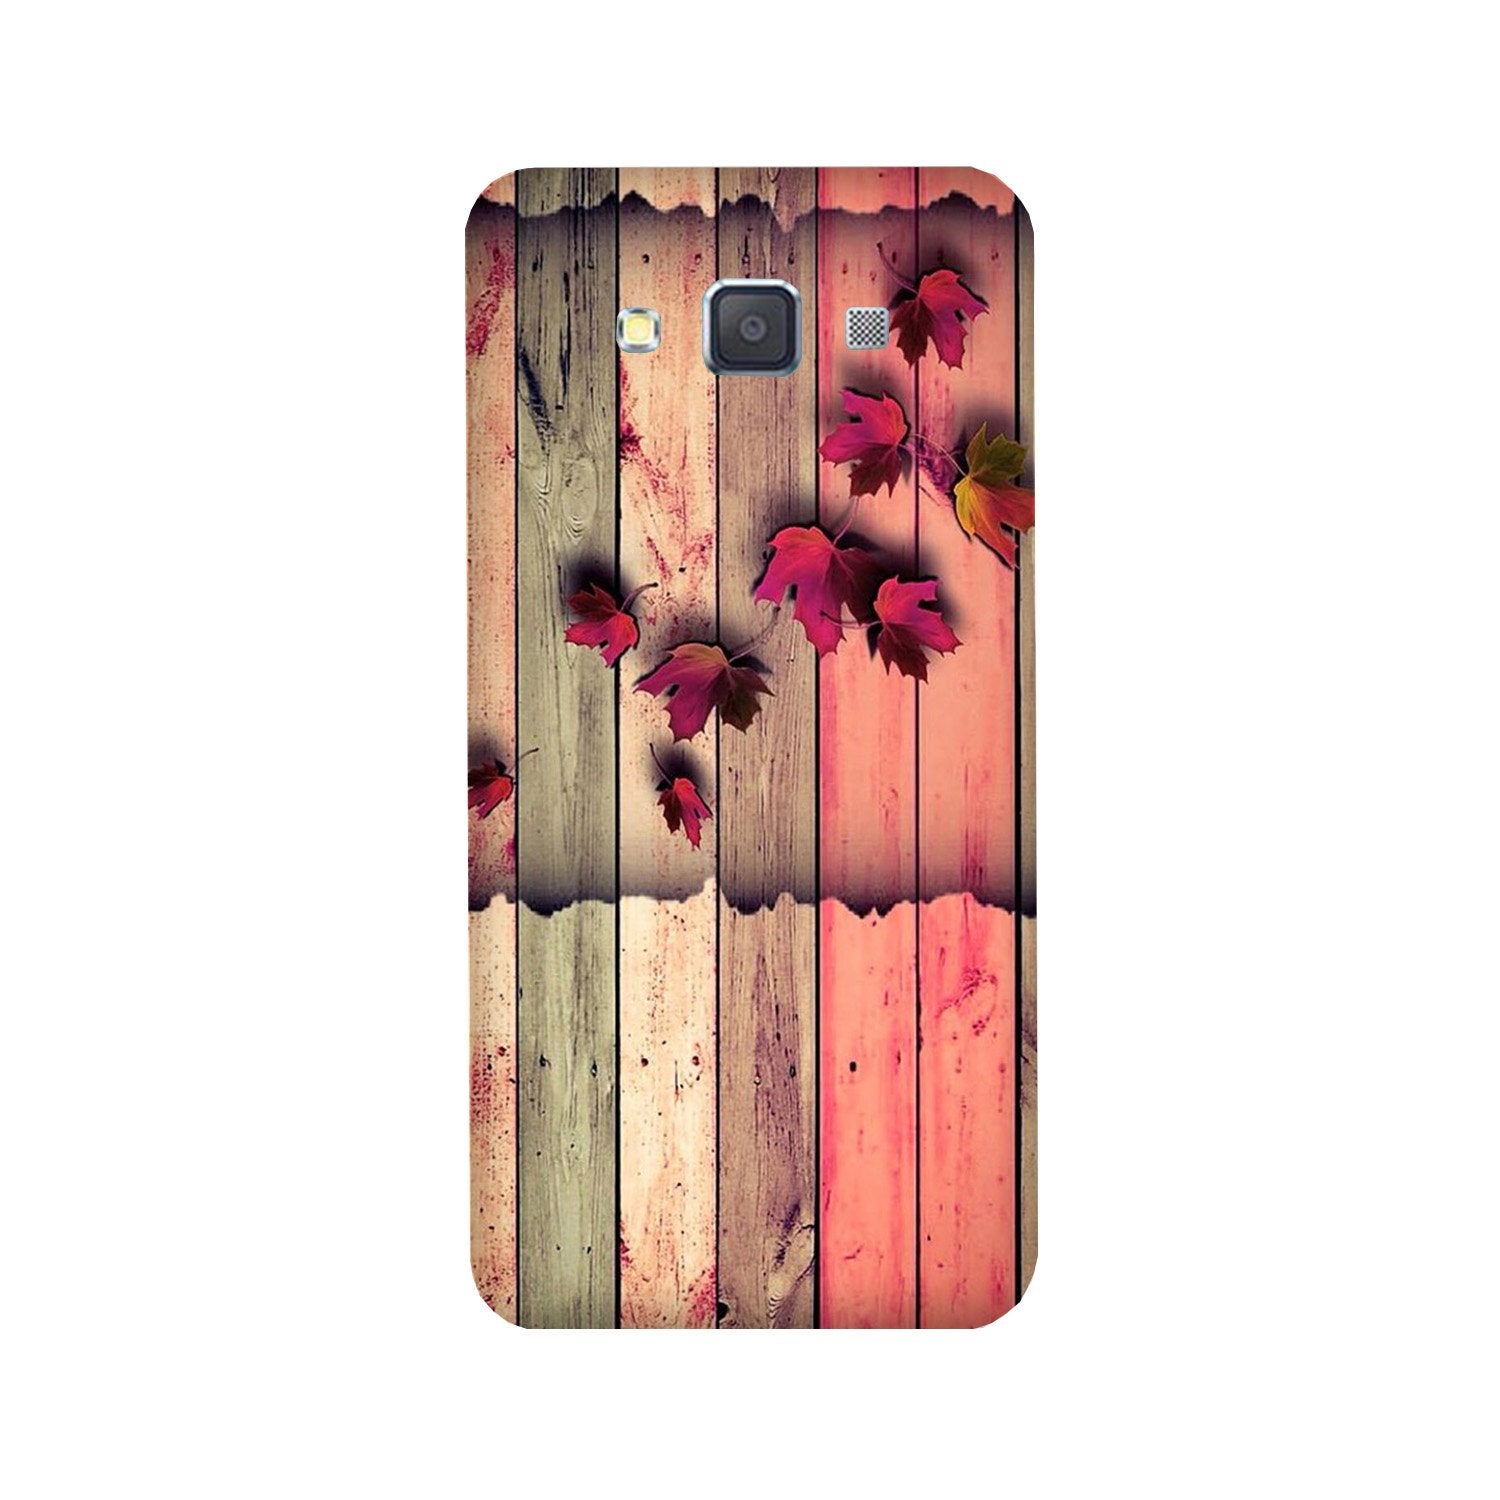 Wooden look2 Case for Galaxy Grand Max